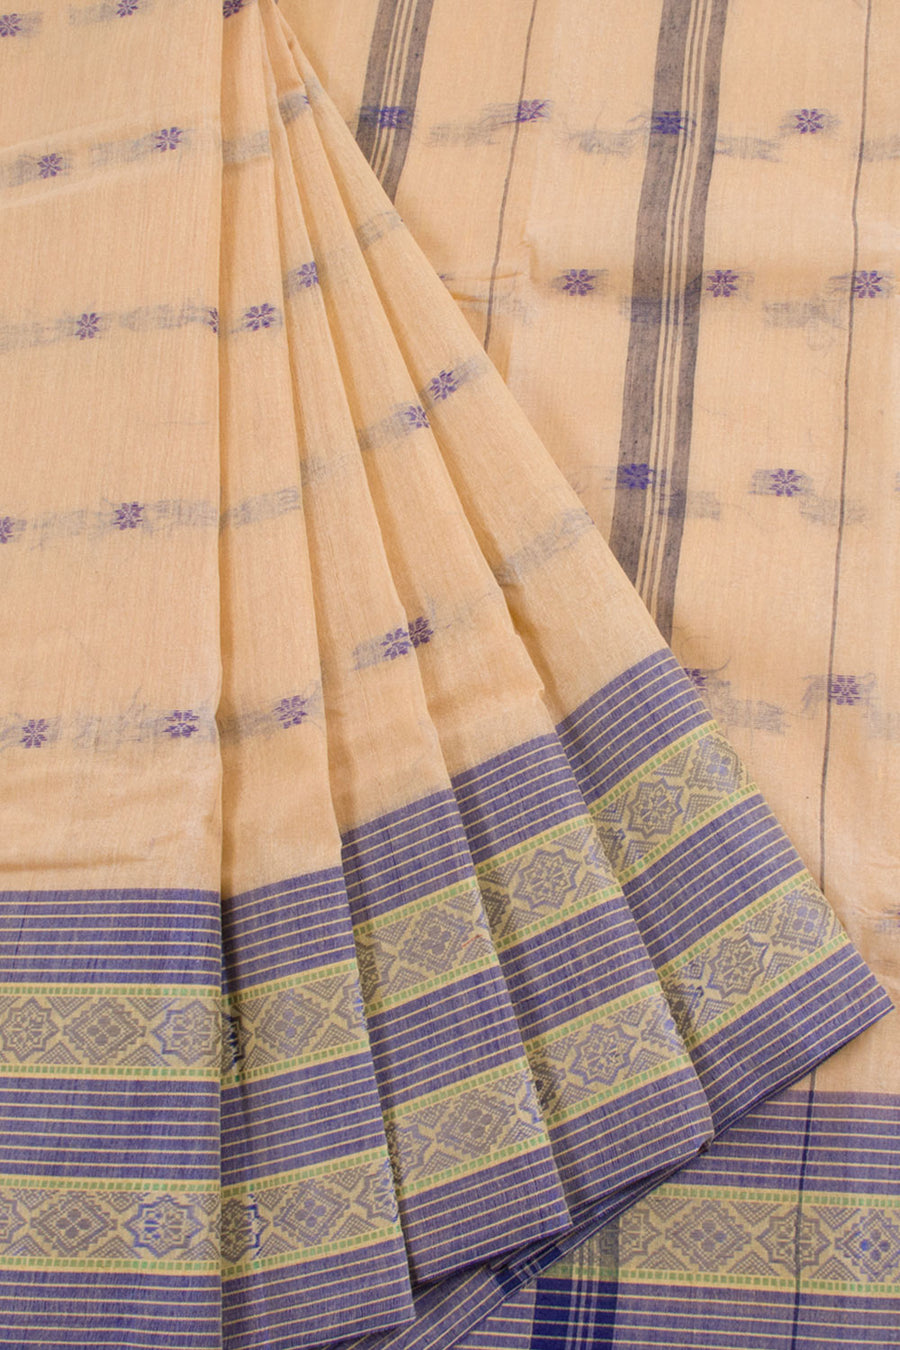 Handwoven Bengal Tant Cotton Saree with Floral Motifs, Floral Border, Paisley Floral Design Pallu and without Blouse